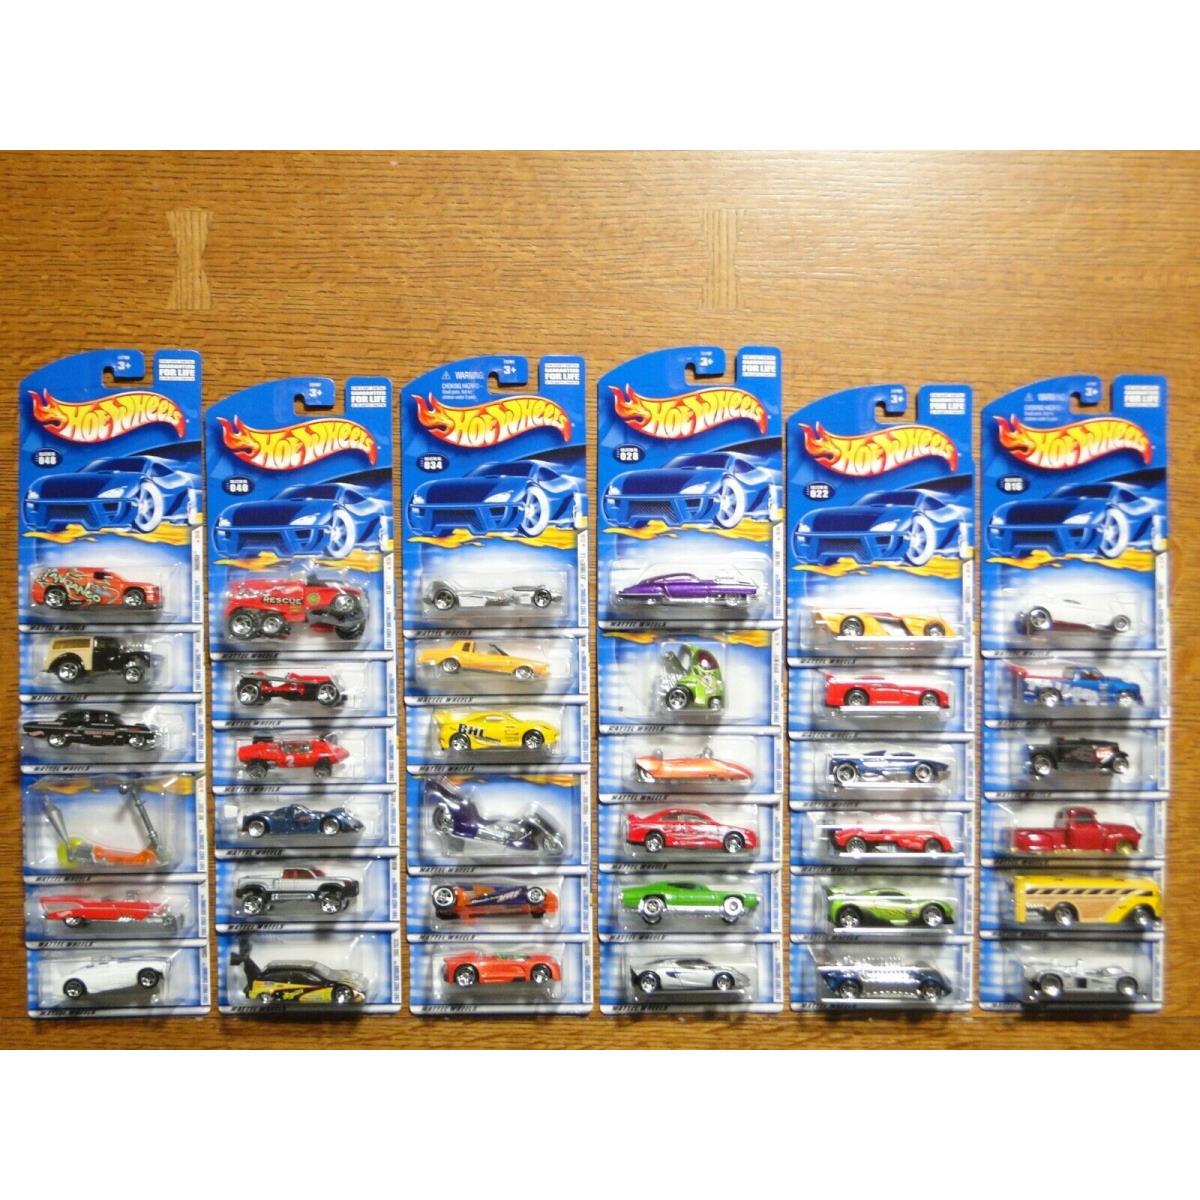 2001 First Editions Complete Set 1-36 Hot Wheels 1:64 on Cards - Nice